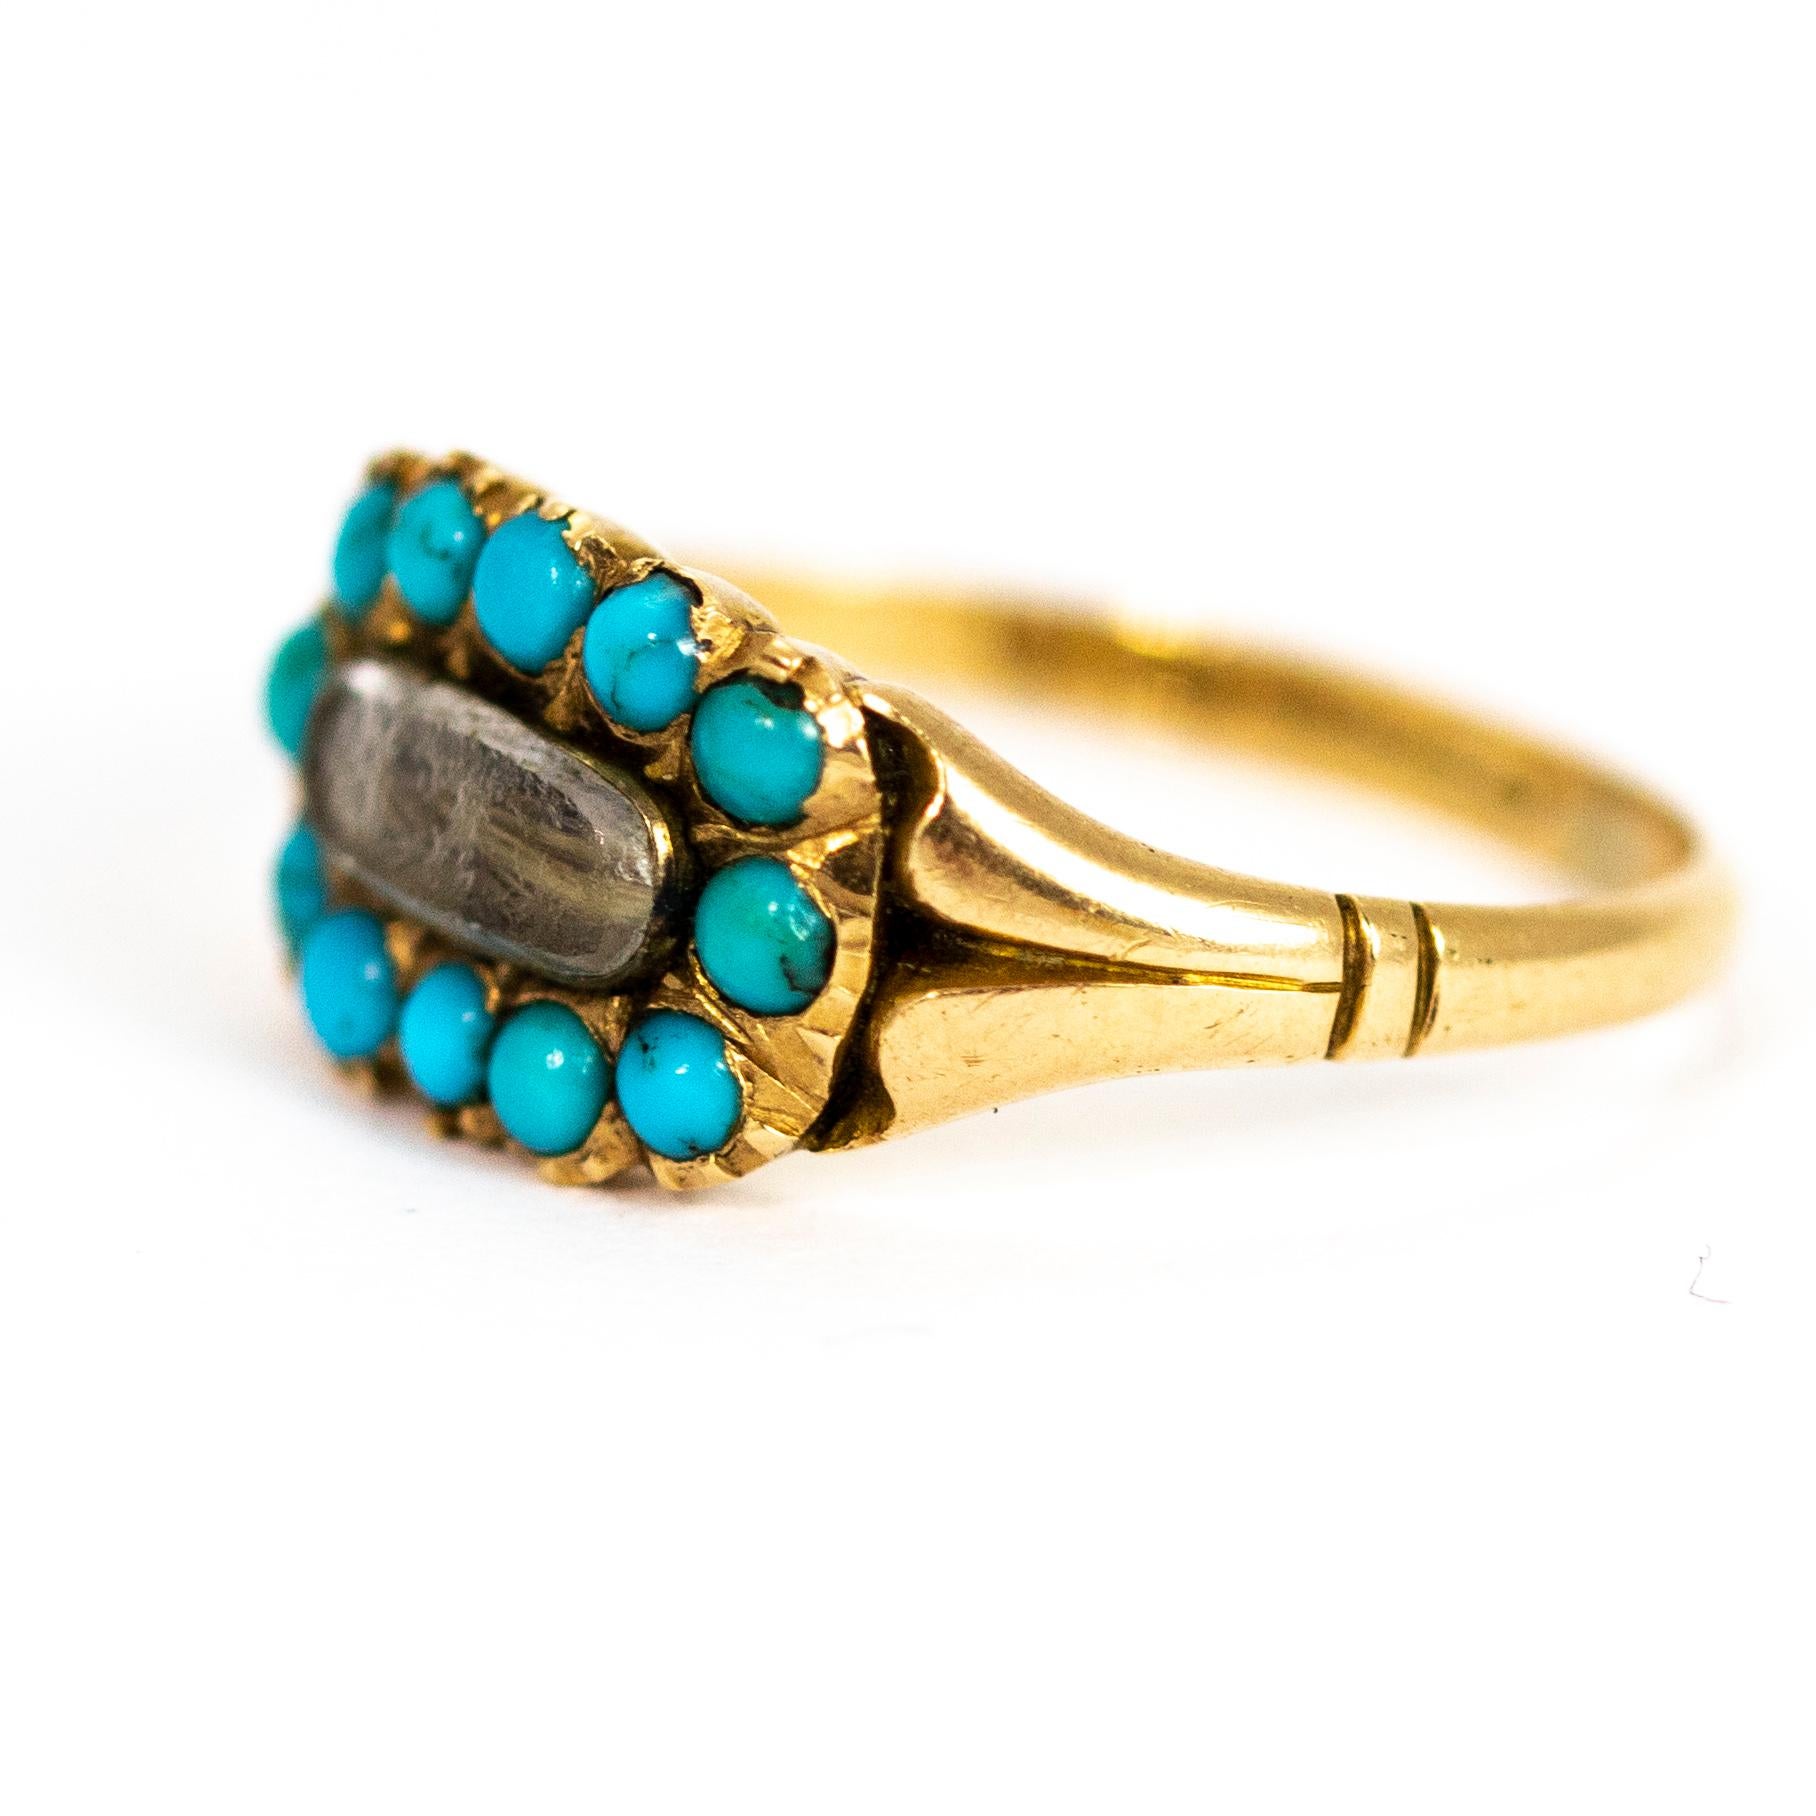 A stunning antique Victorian mourning ring. Fronted with a glazed locket compartment containing woven hair, surrounded by a halo of beautiful round turquoise cabochons. Modelled in 15 carat yellow gold. Fully hallmarked 1886 Birmingham,